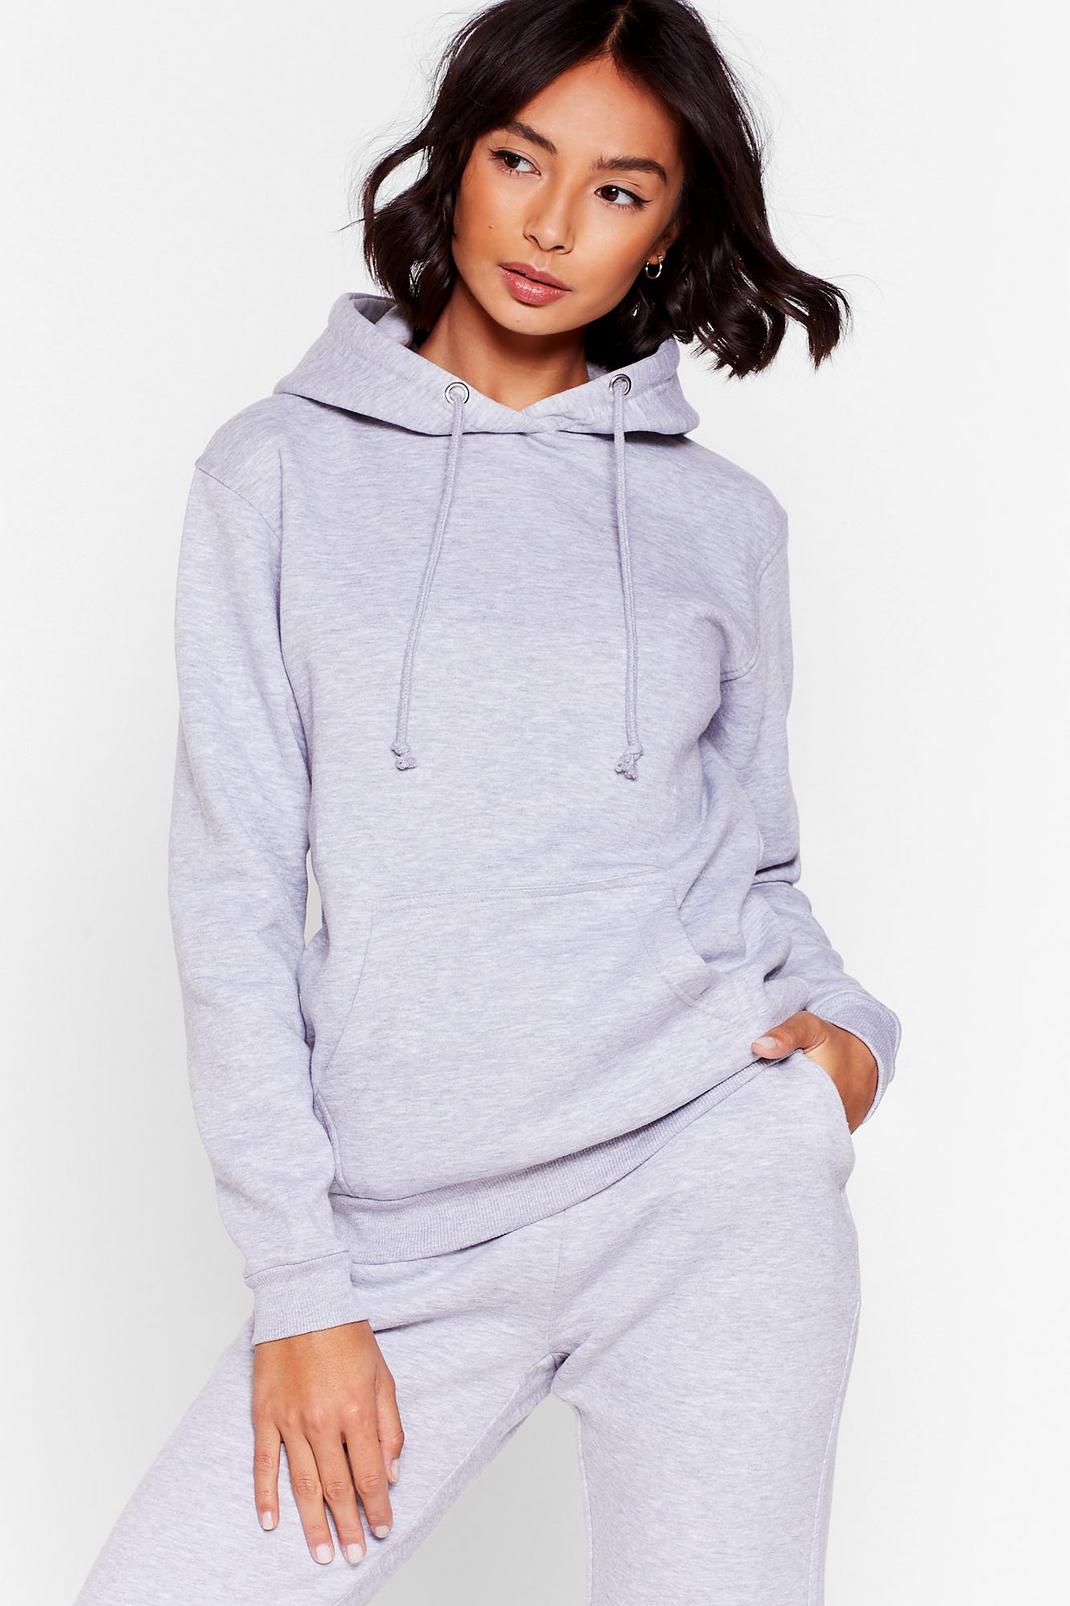 Too Busy Chilling Pullover Hoodie image number 1